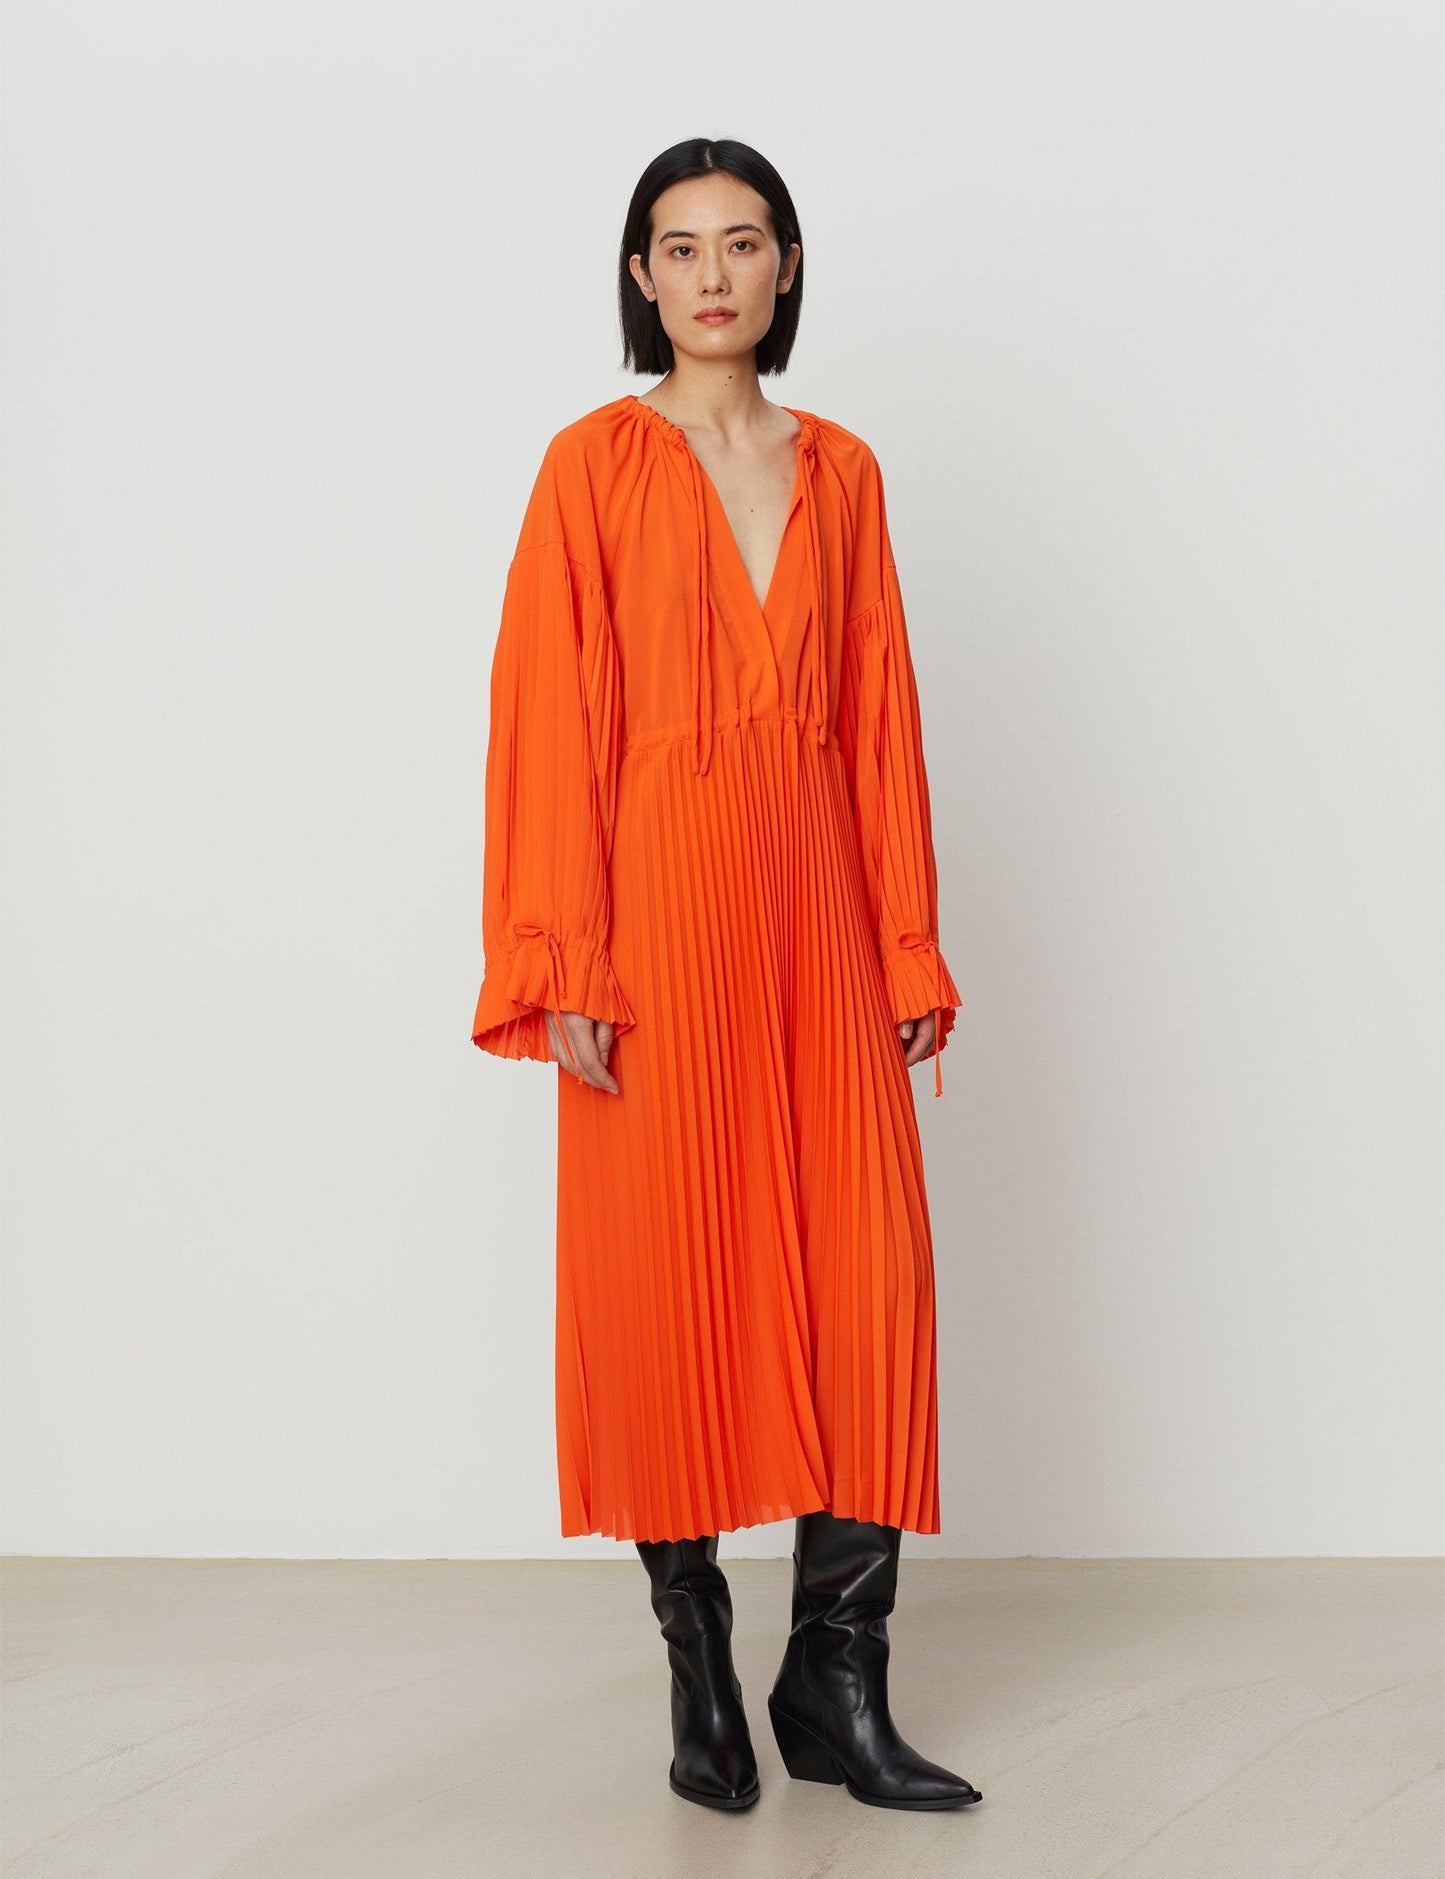 DAY BIRGER - Leighton Flame Pleated Dress - 32 The Guild 